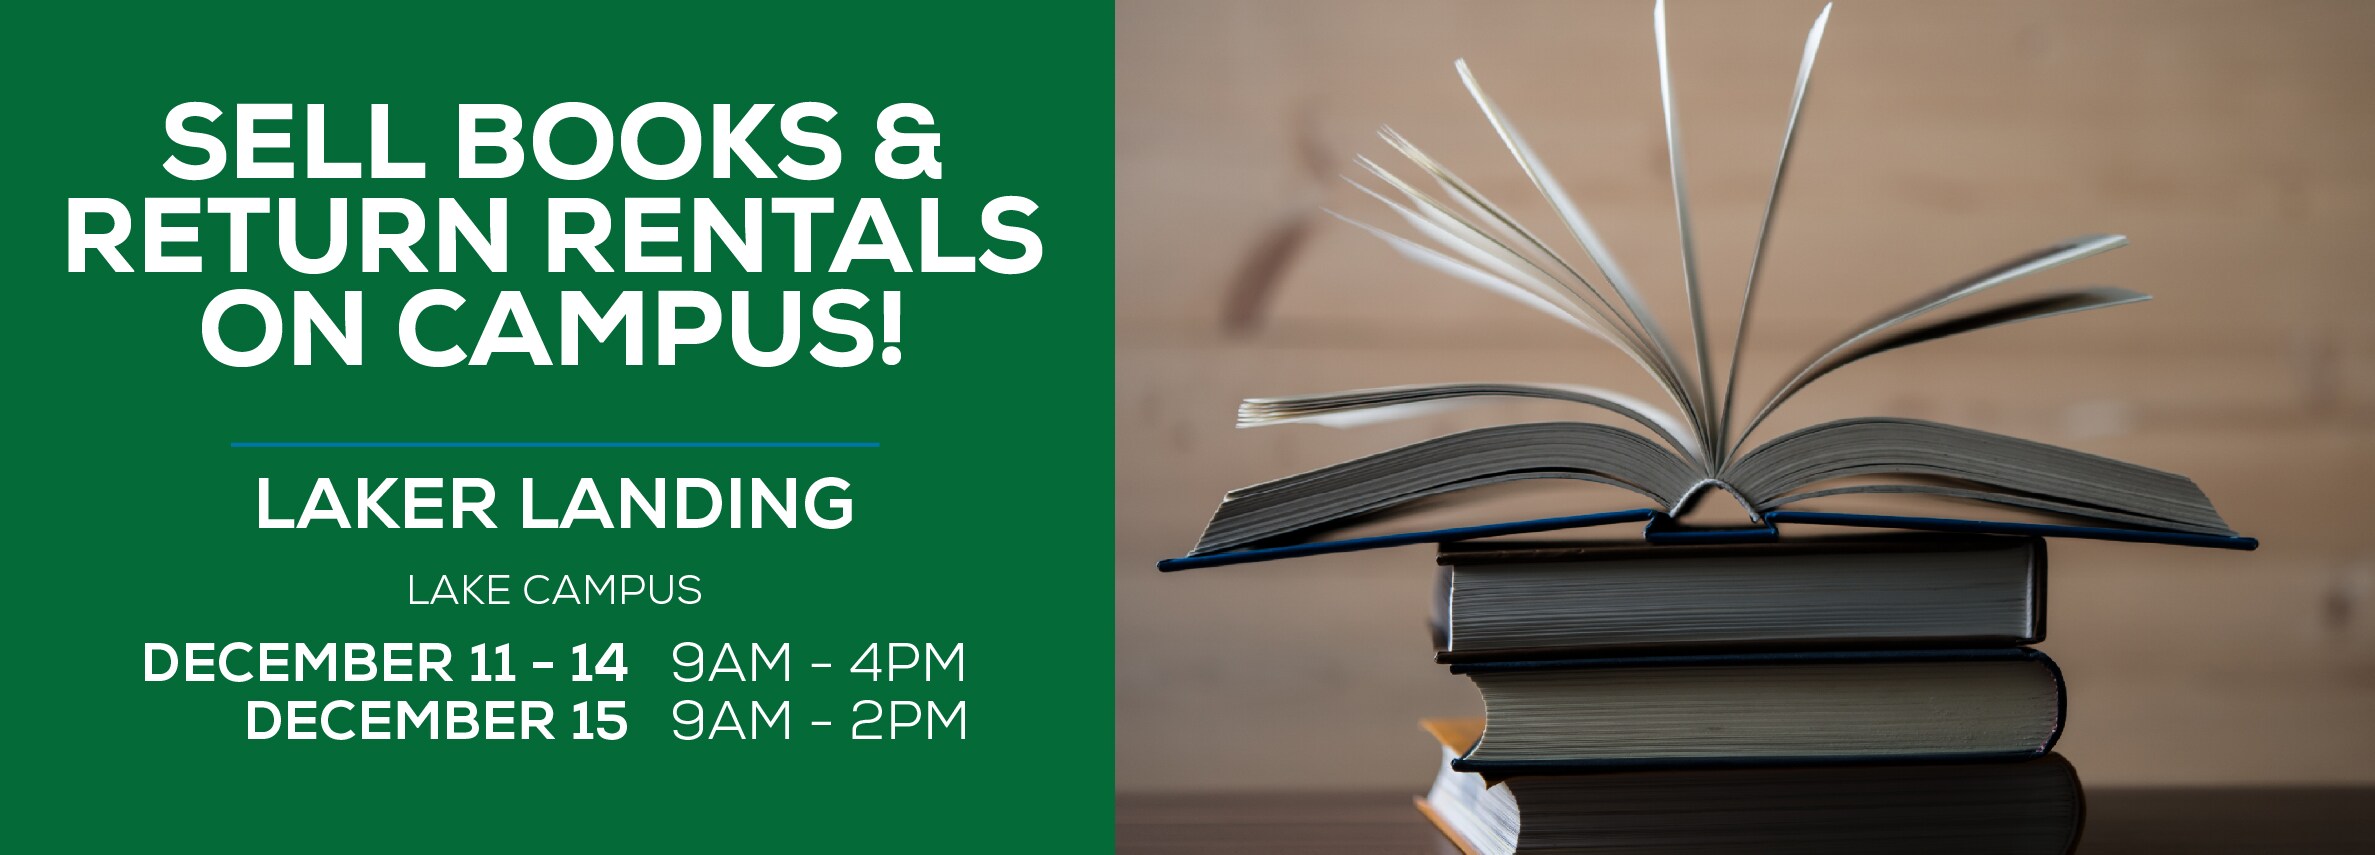 SELL BOOKS & RETURN RENTALS ON CAMPUS! LAKER LANDING LAKE CAMPUS DECEMBER 11 - 14 9AM - 4PM DECEMBER 15 9AM - 2PM